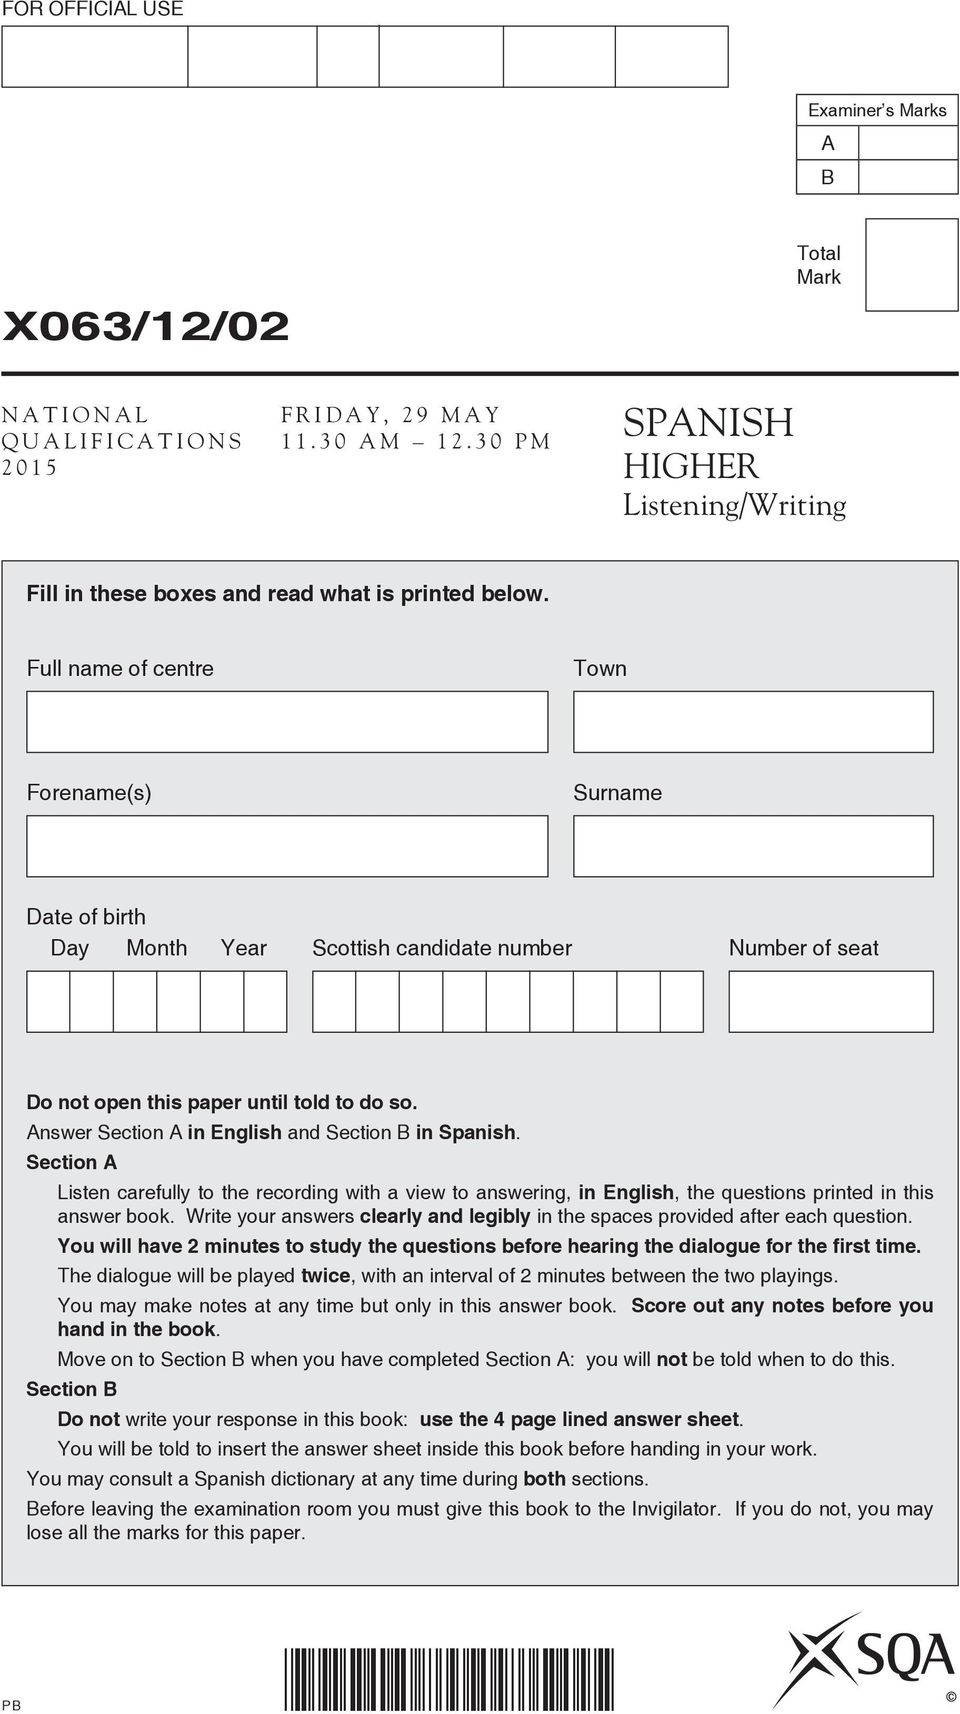 Answer Section A in English and Section B in Spanish. Section A Listen carefully to the recording with a view to answering, in English, the questions printed in this answer book.